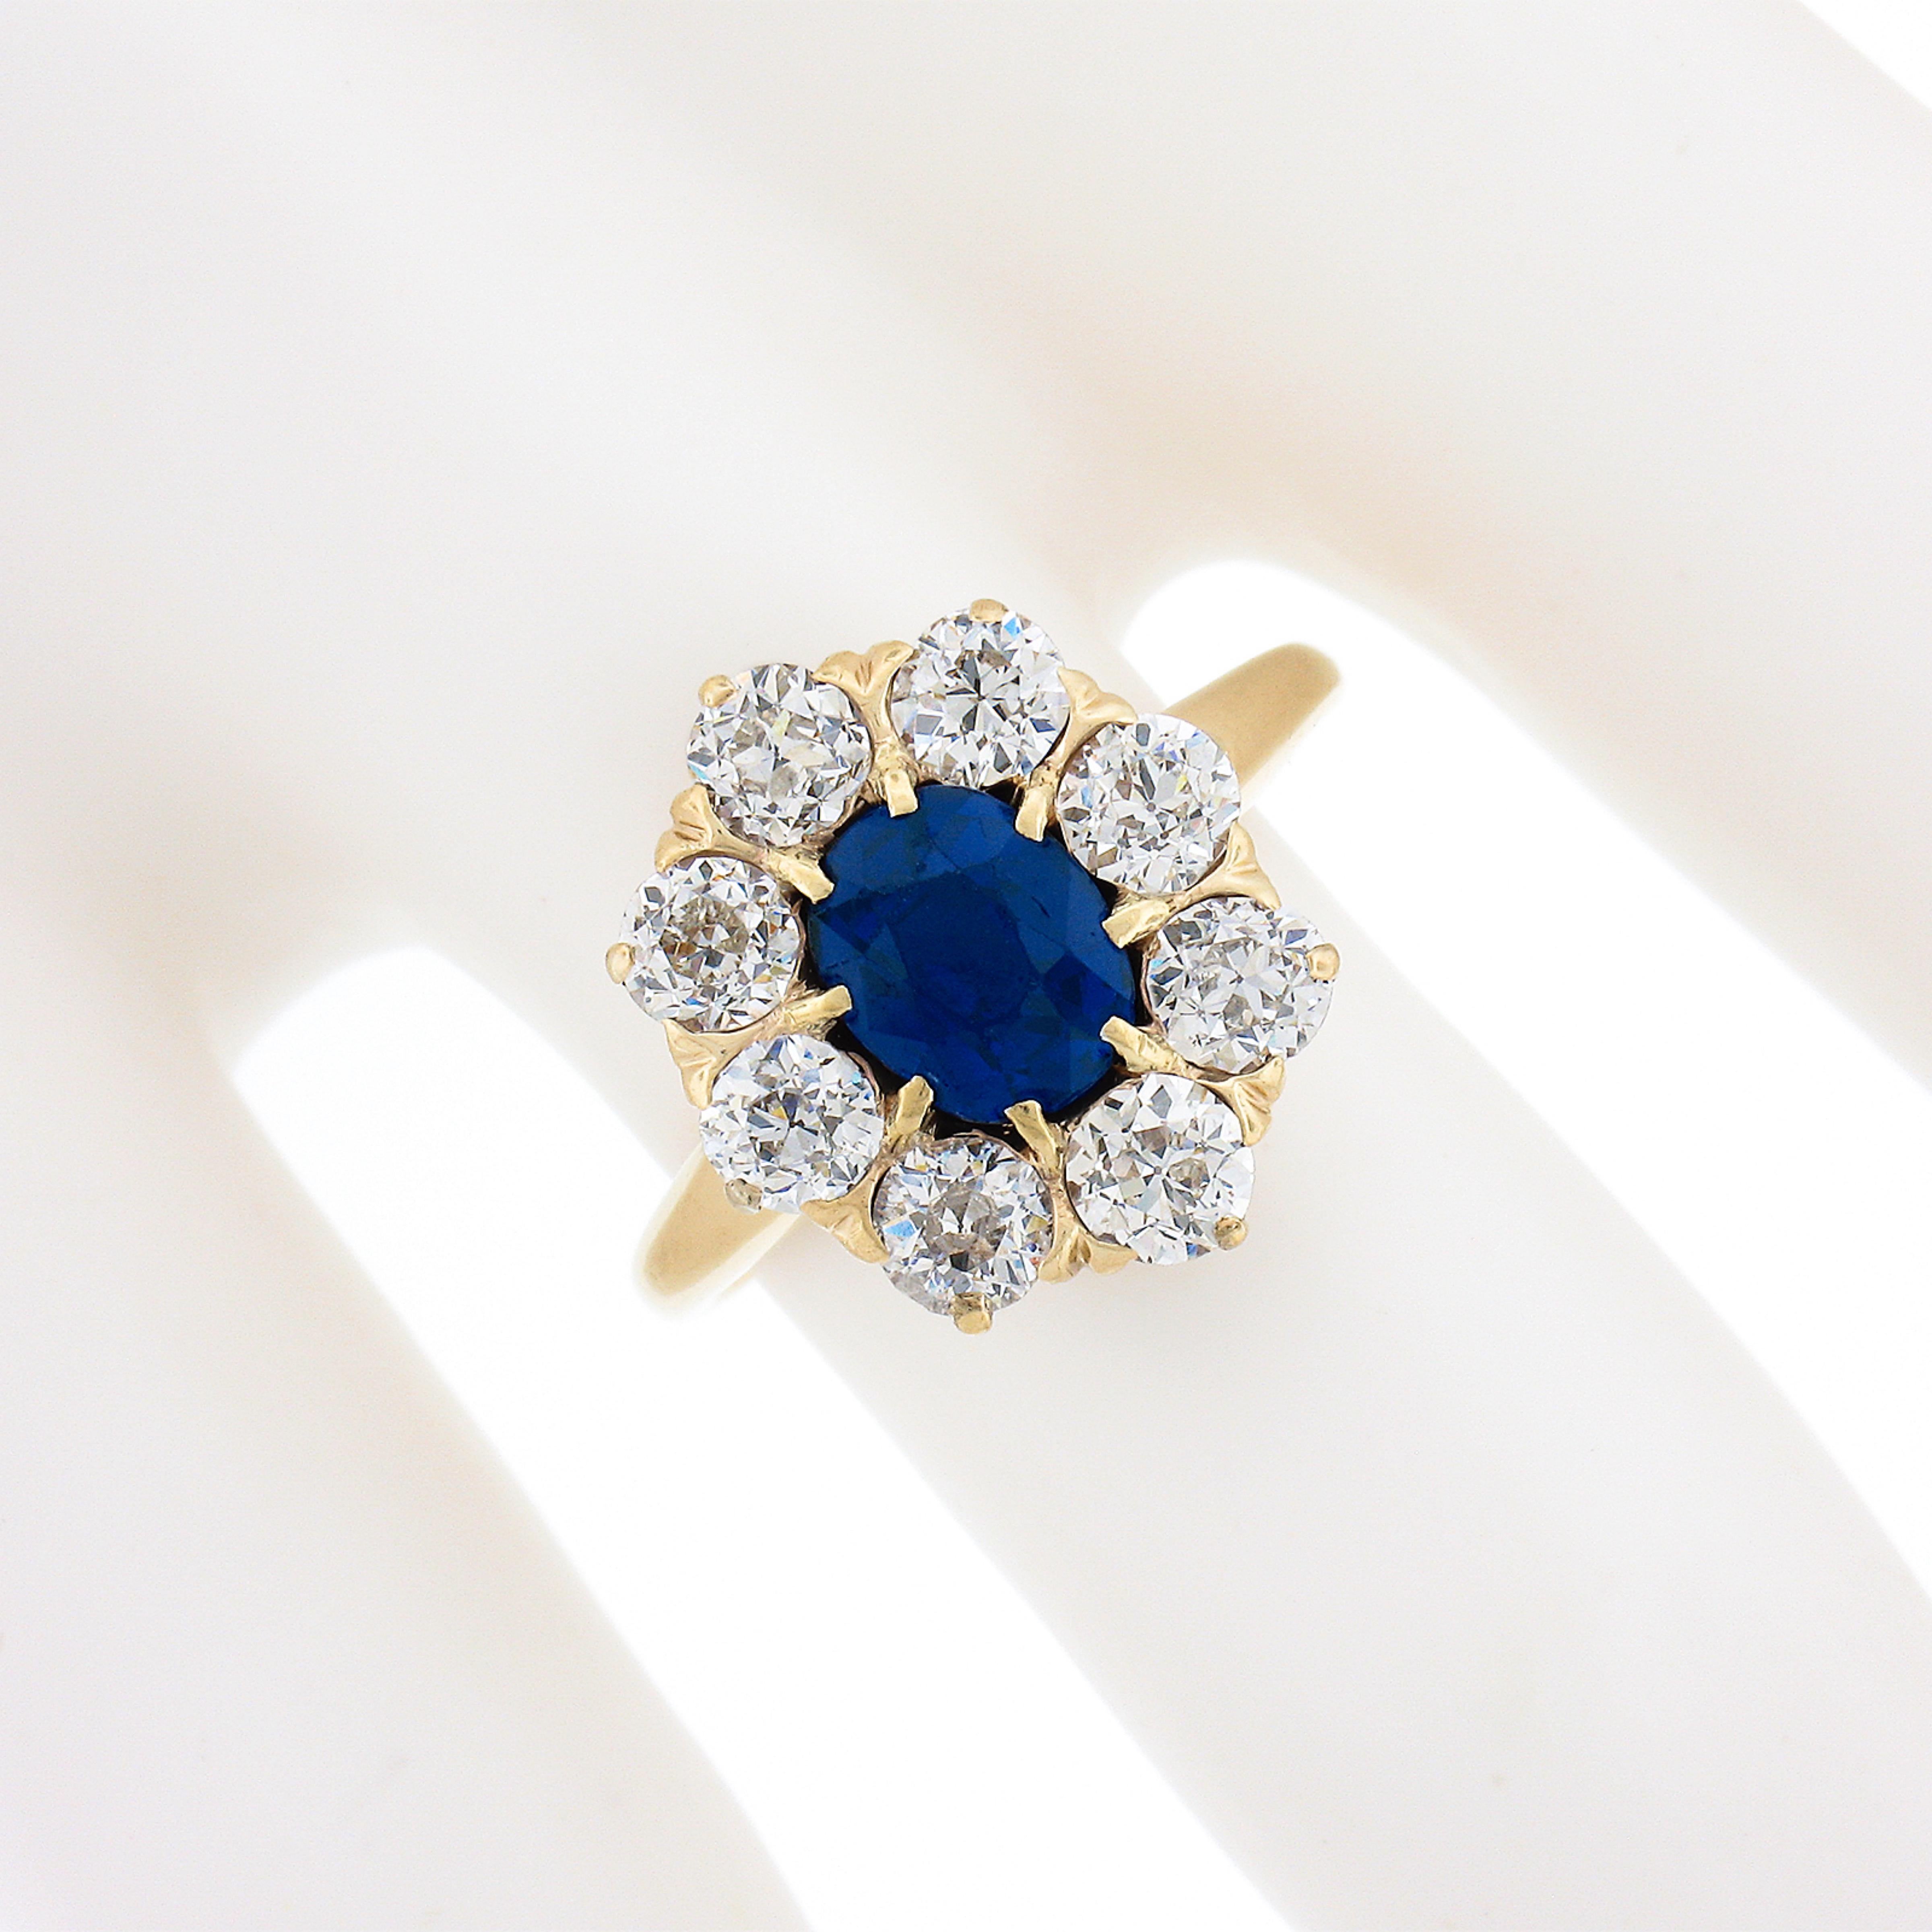 Antique Victorian 14k Gold 2.40ct AGL Burma No Heat Sapphire & Diamond Halo Ring In Good Condition For Sale In Montclair, NJ